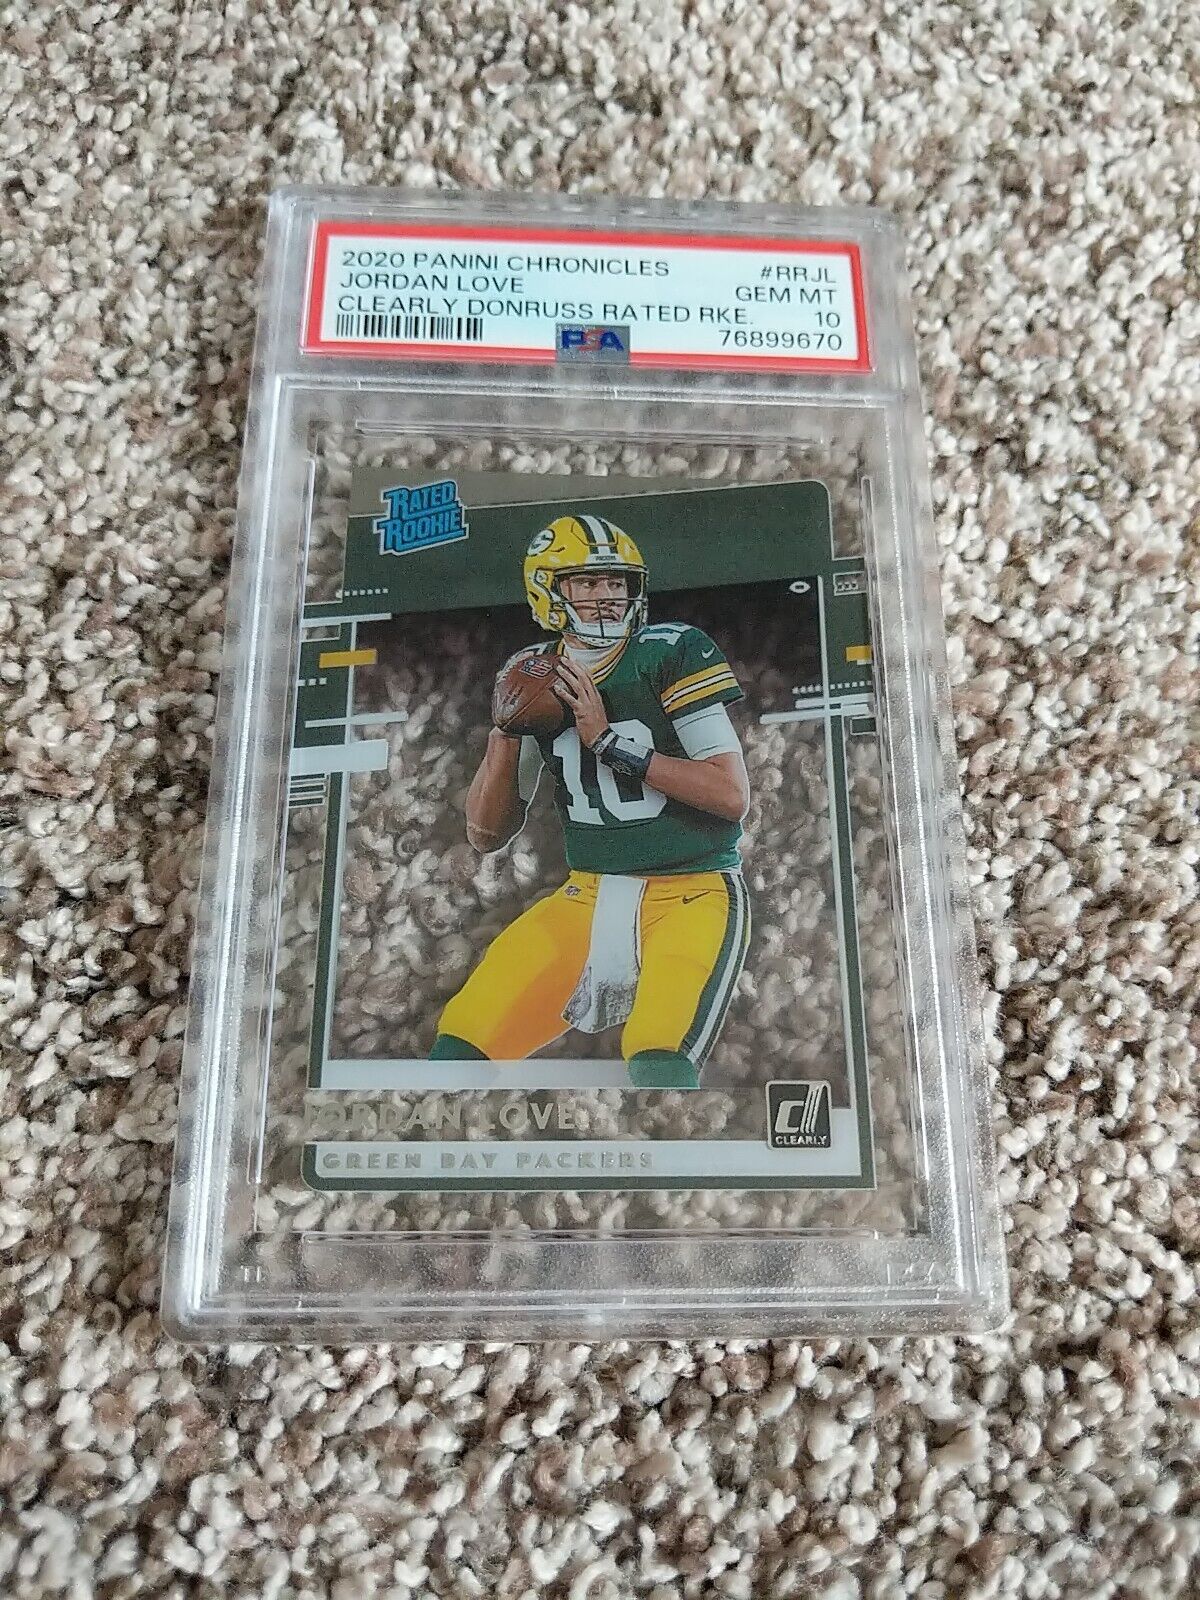 2020 Panini Chronicles Clearly Donruss Rated Rookie Jordan Love PSA 10